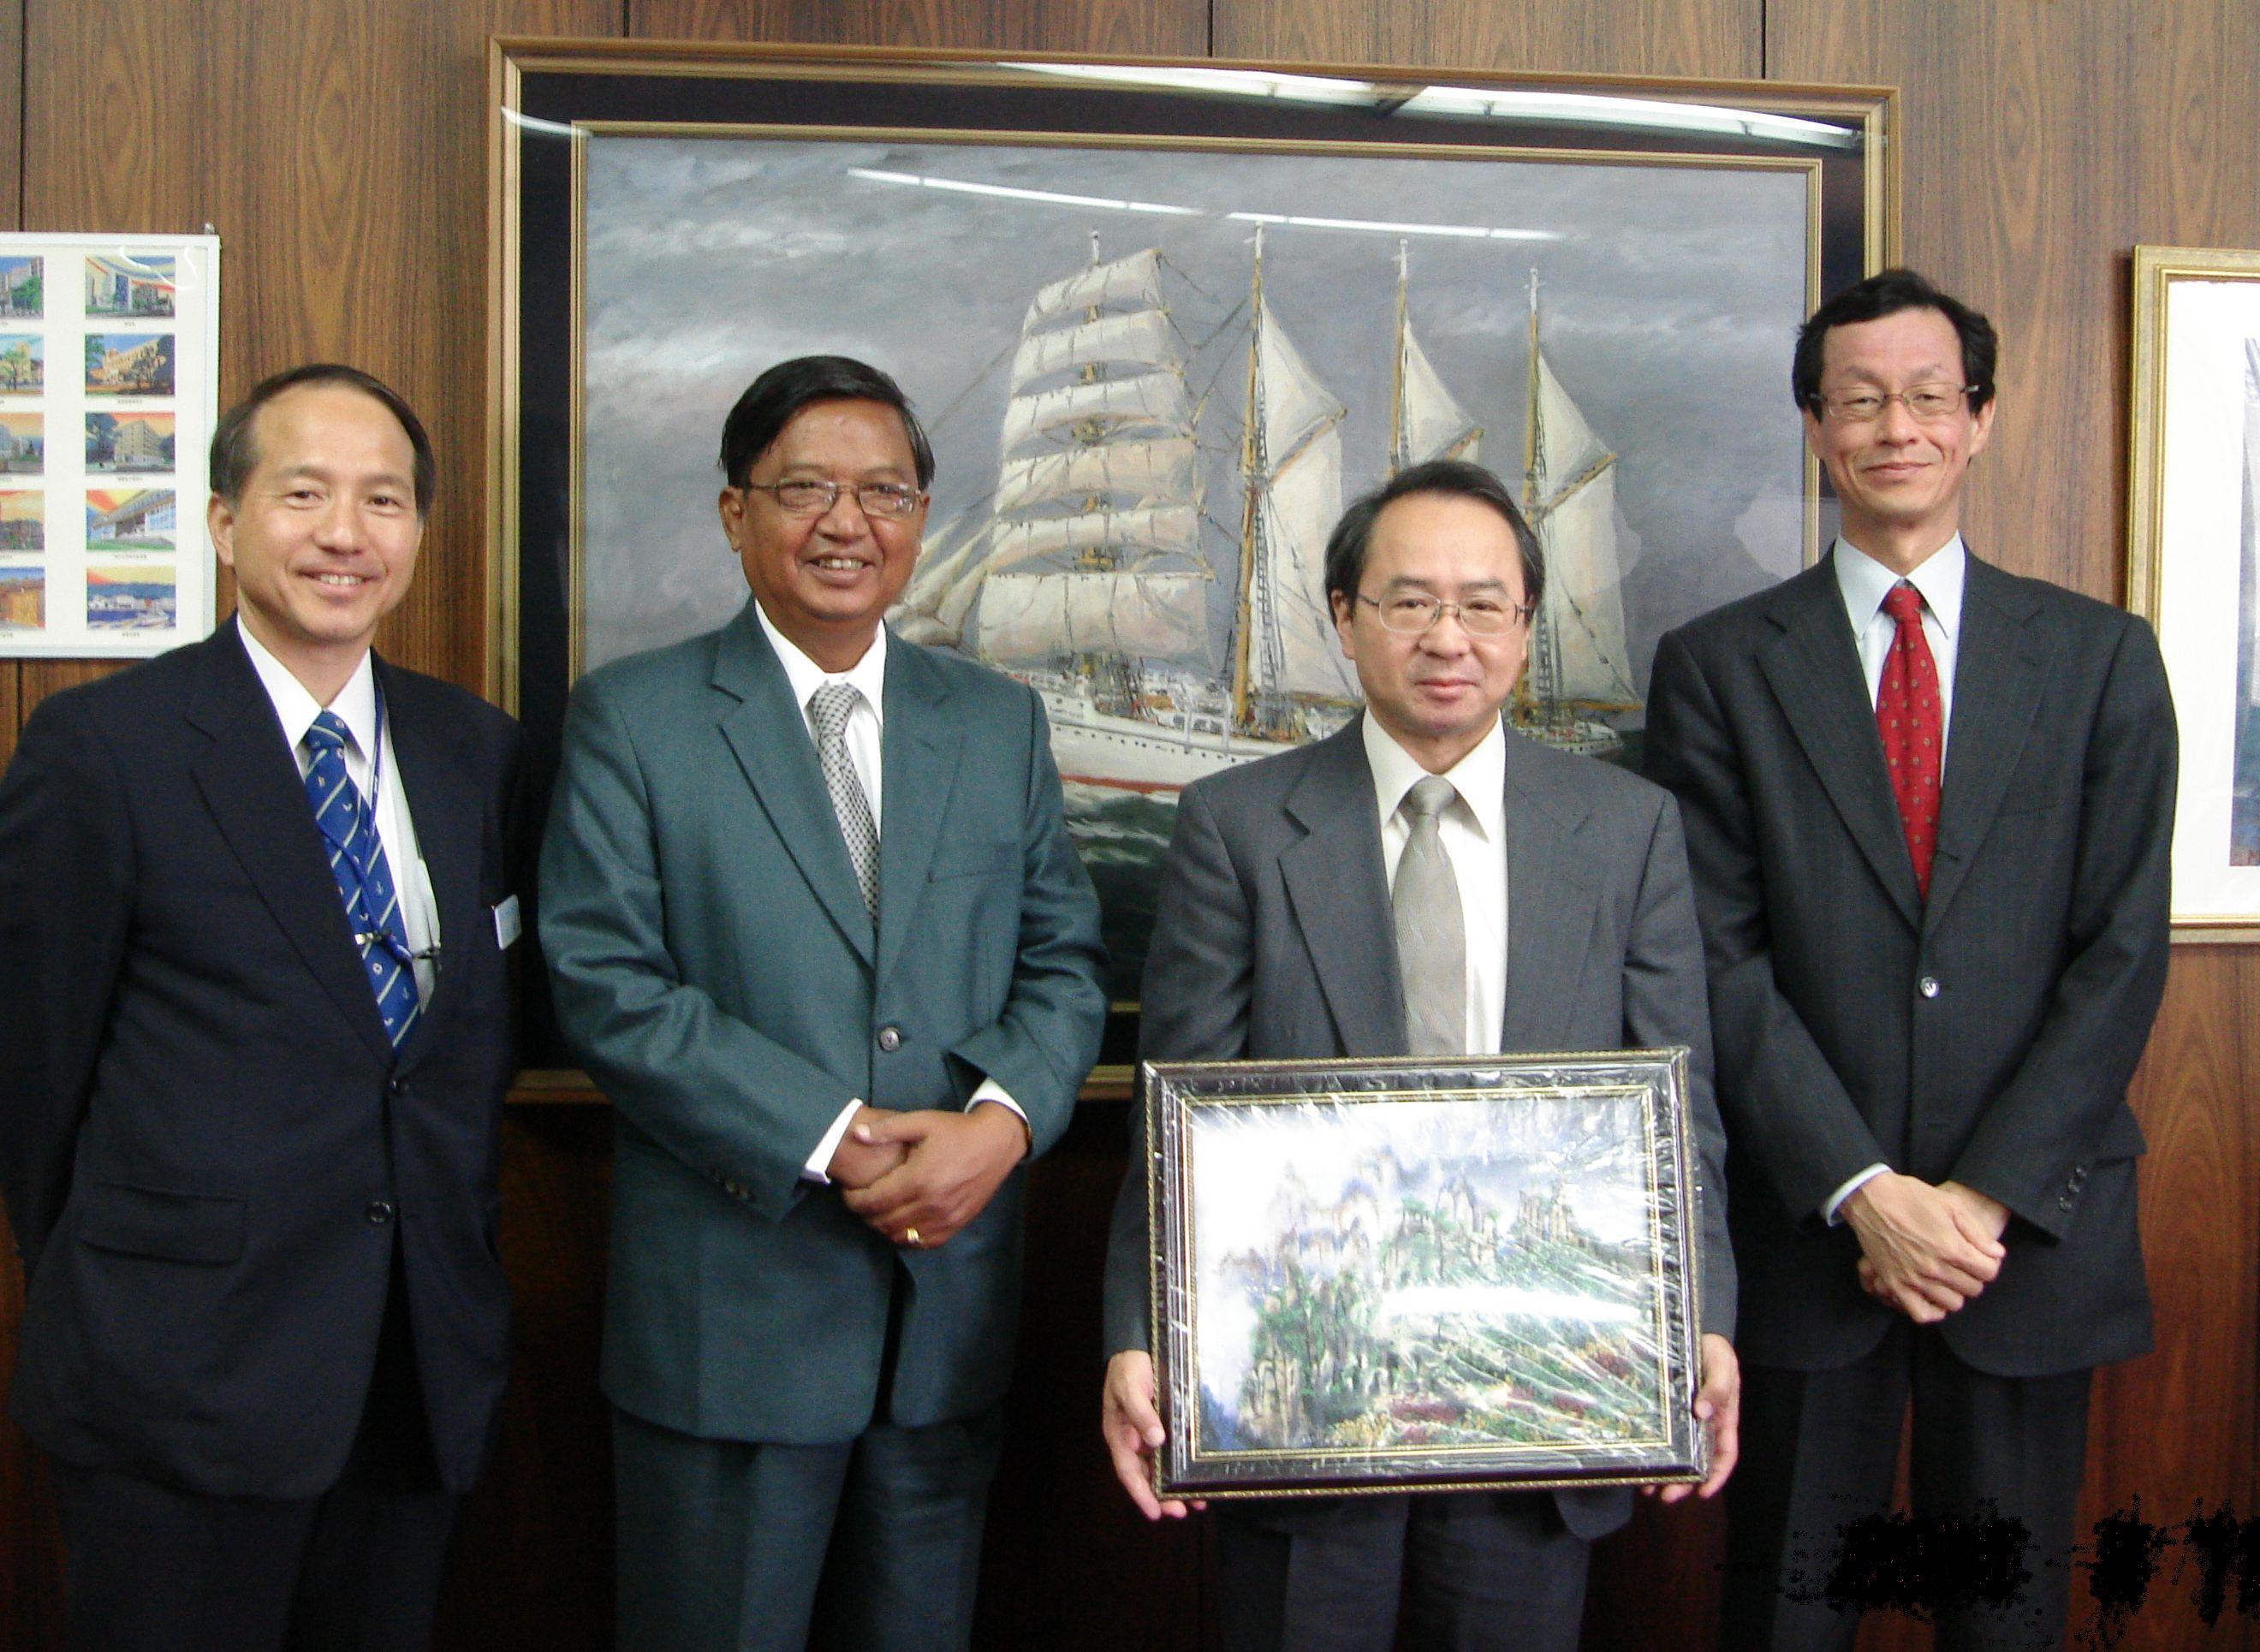 A Courtesy Visit by the President of Myanmar Maritime University